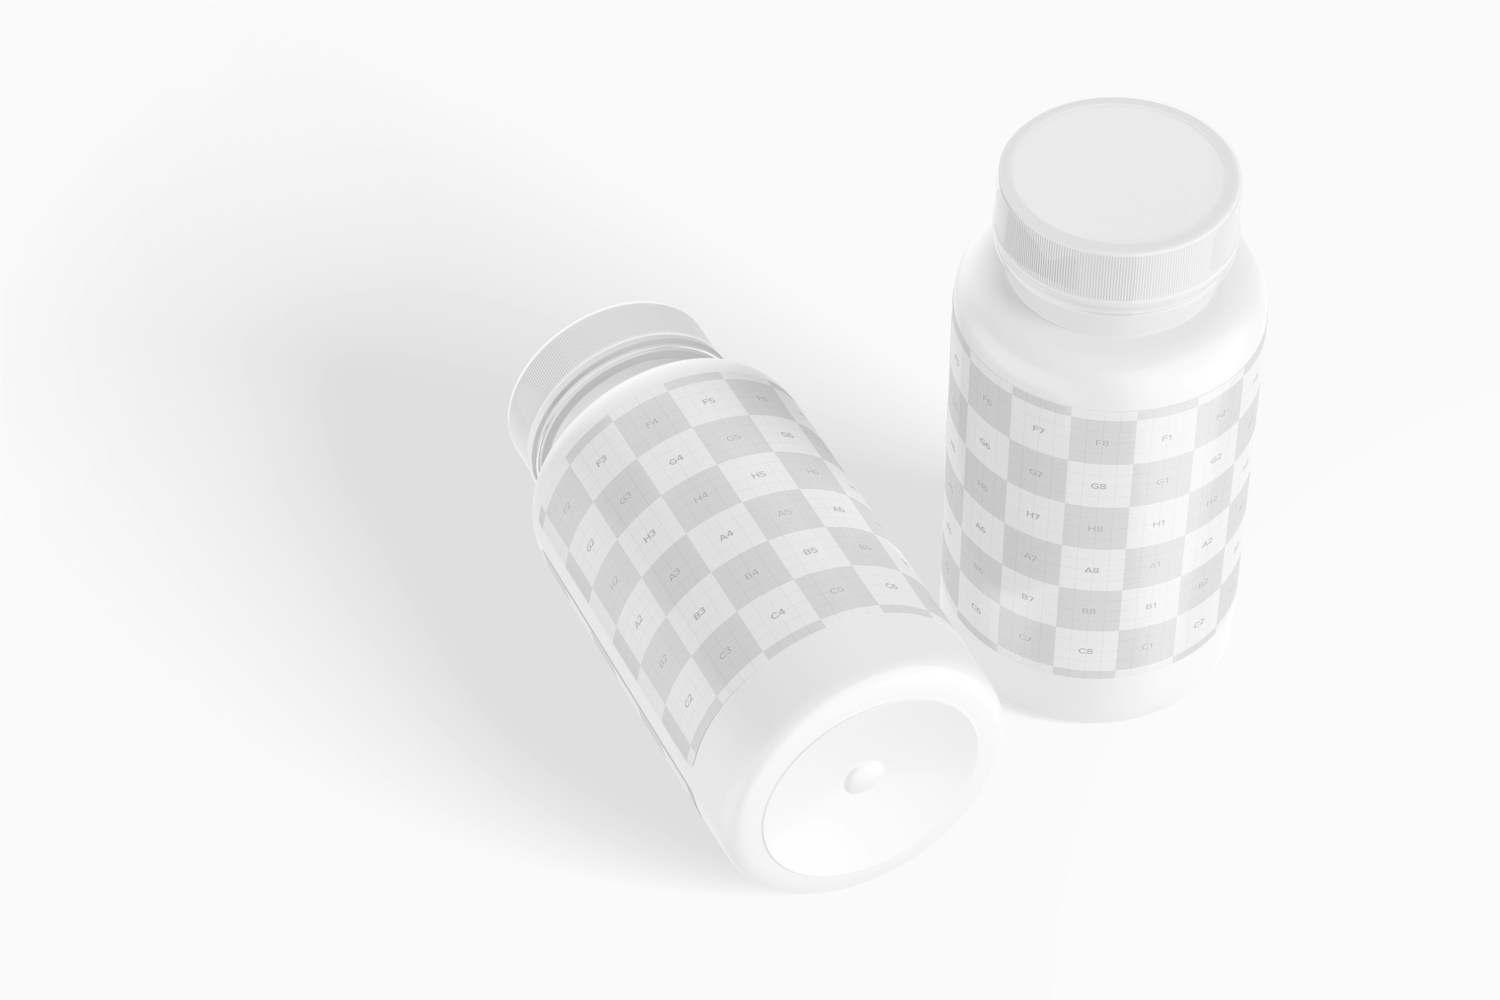 150 cc Supplement Bottles Mockup, Standing and Dropped